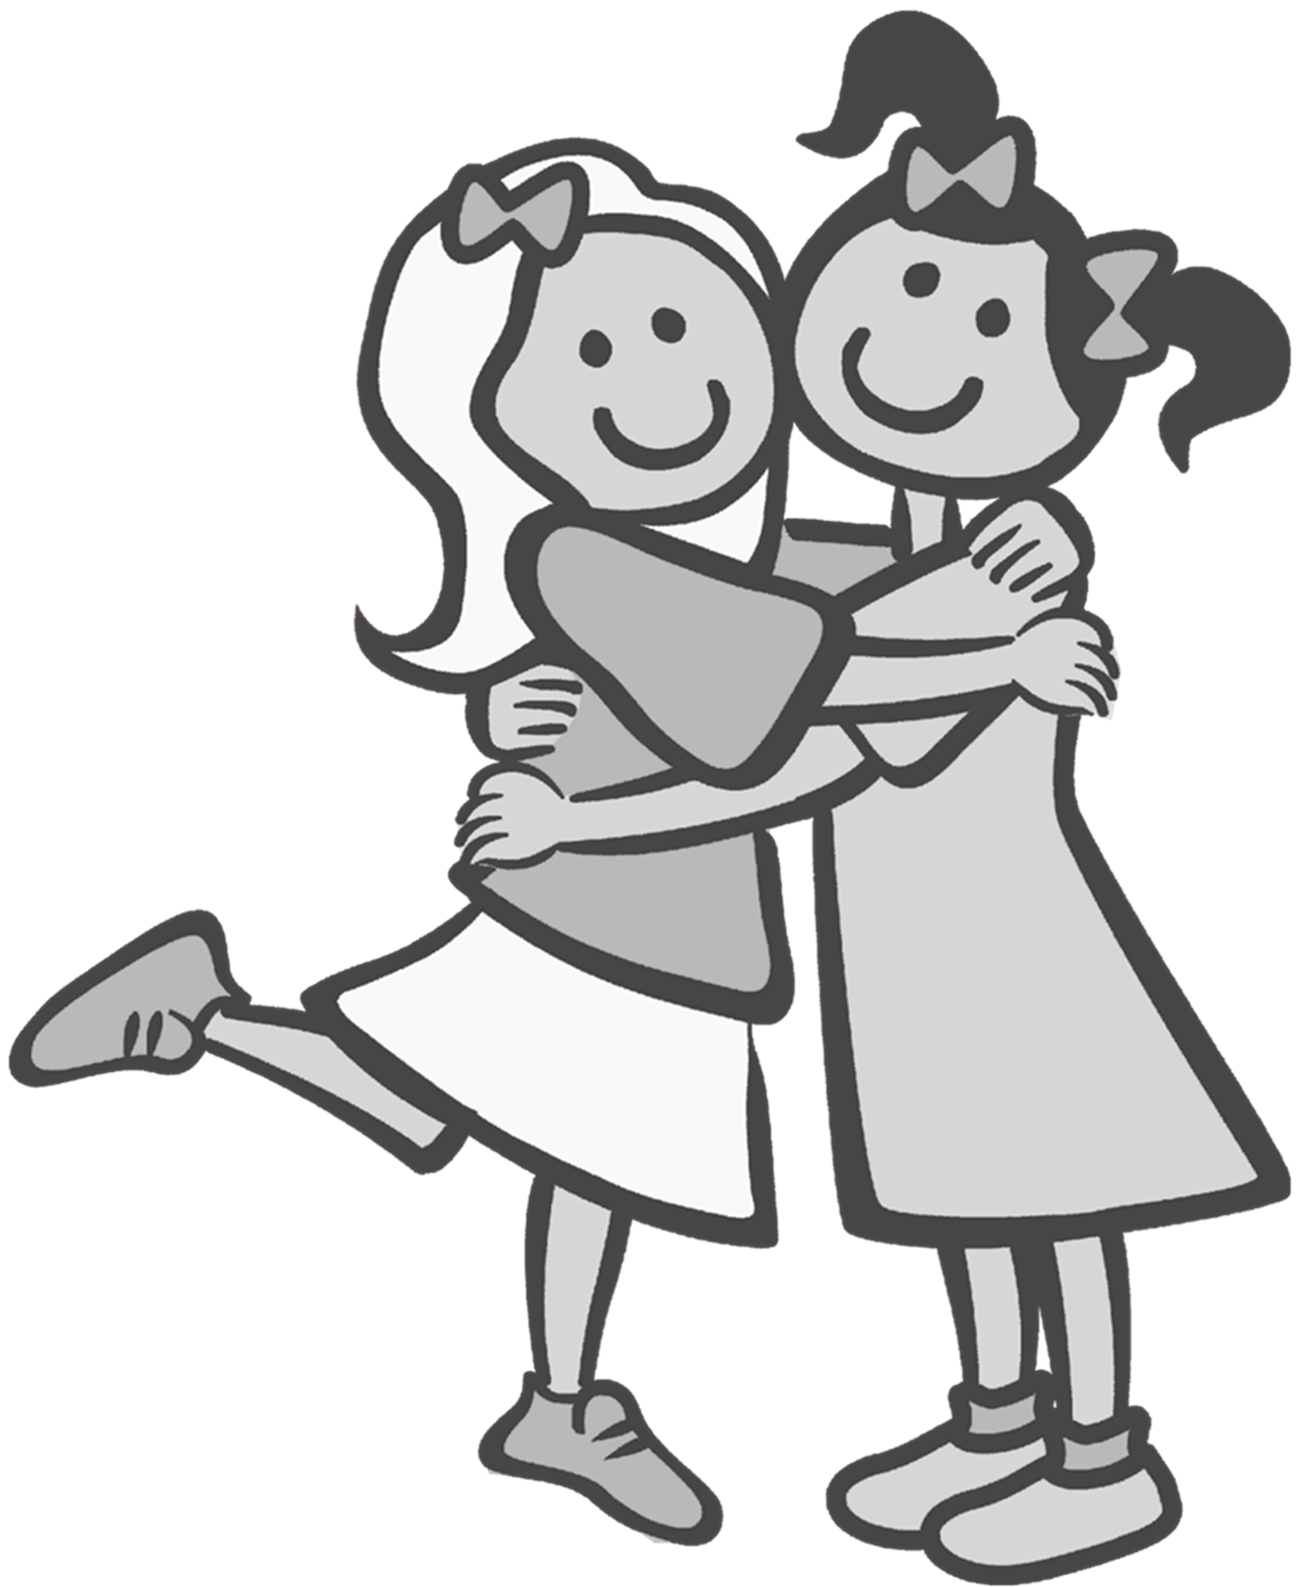 Friends Hugging Drawing   Clipart Panda   Free Clipart Images